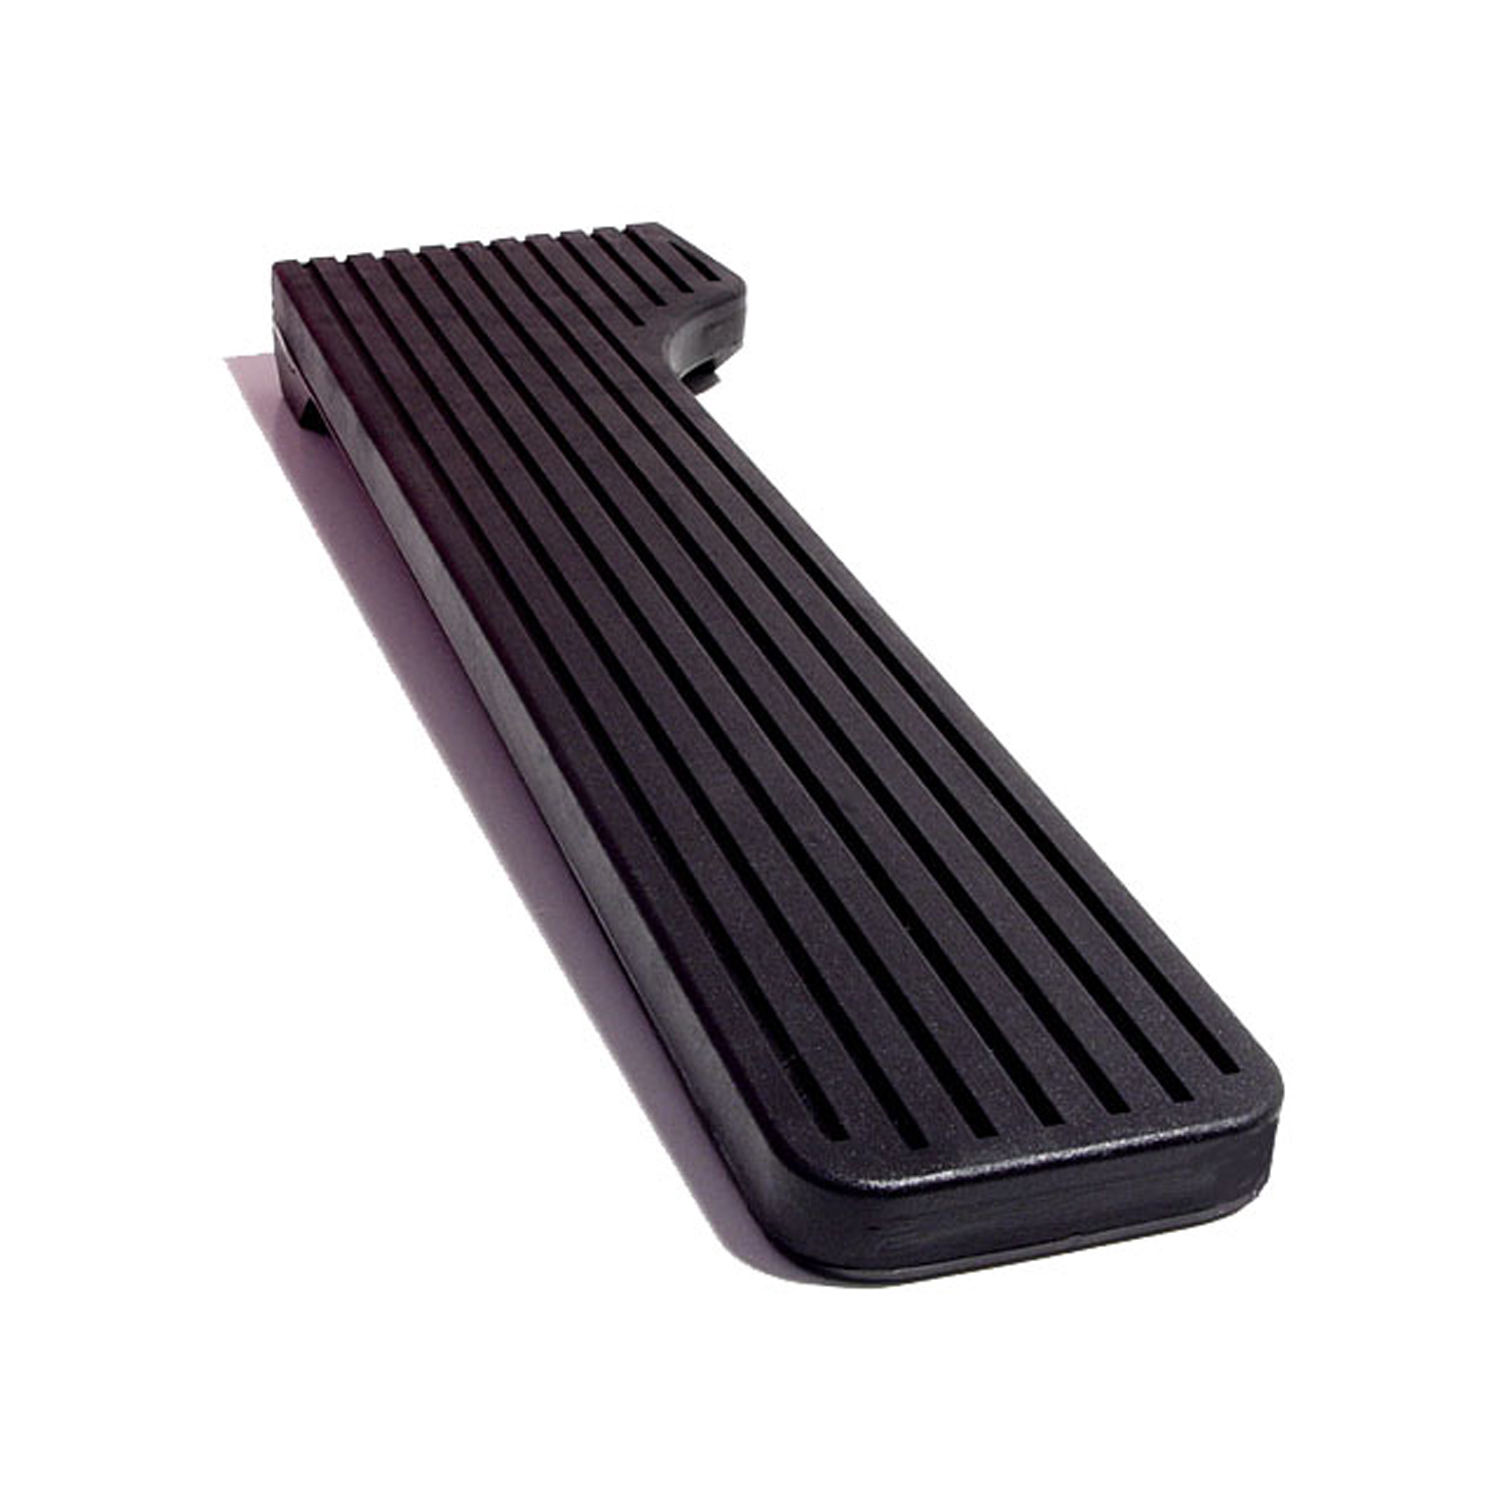 1965 Chevrolet Chevy II Accelerator Pedal Pad without flange-AP 31-B